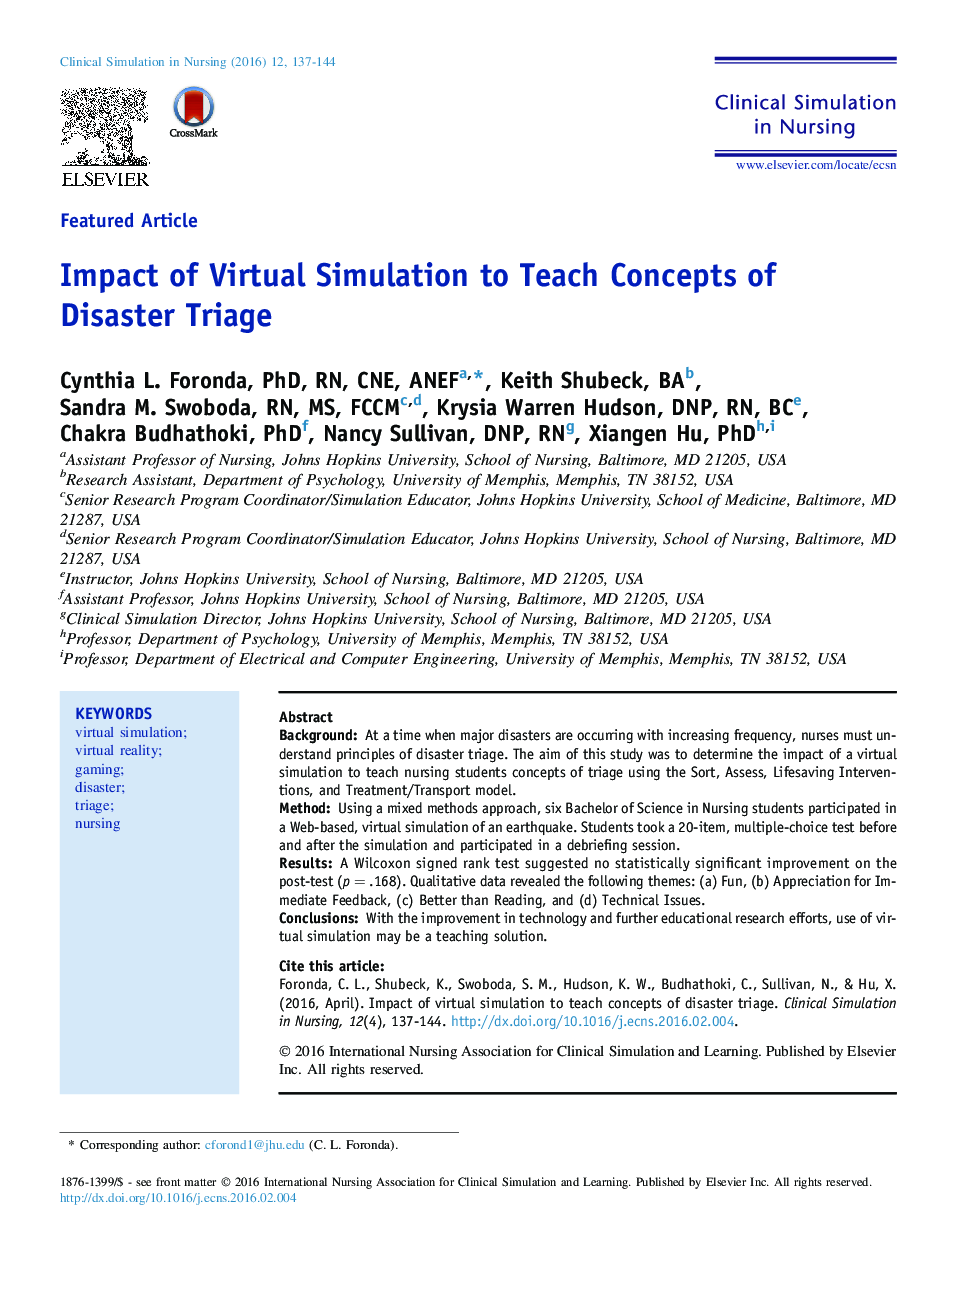 Impact of Virtual Simulation to Teach Concepts of Disaster Triage